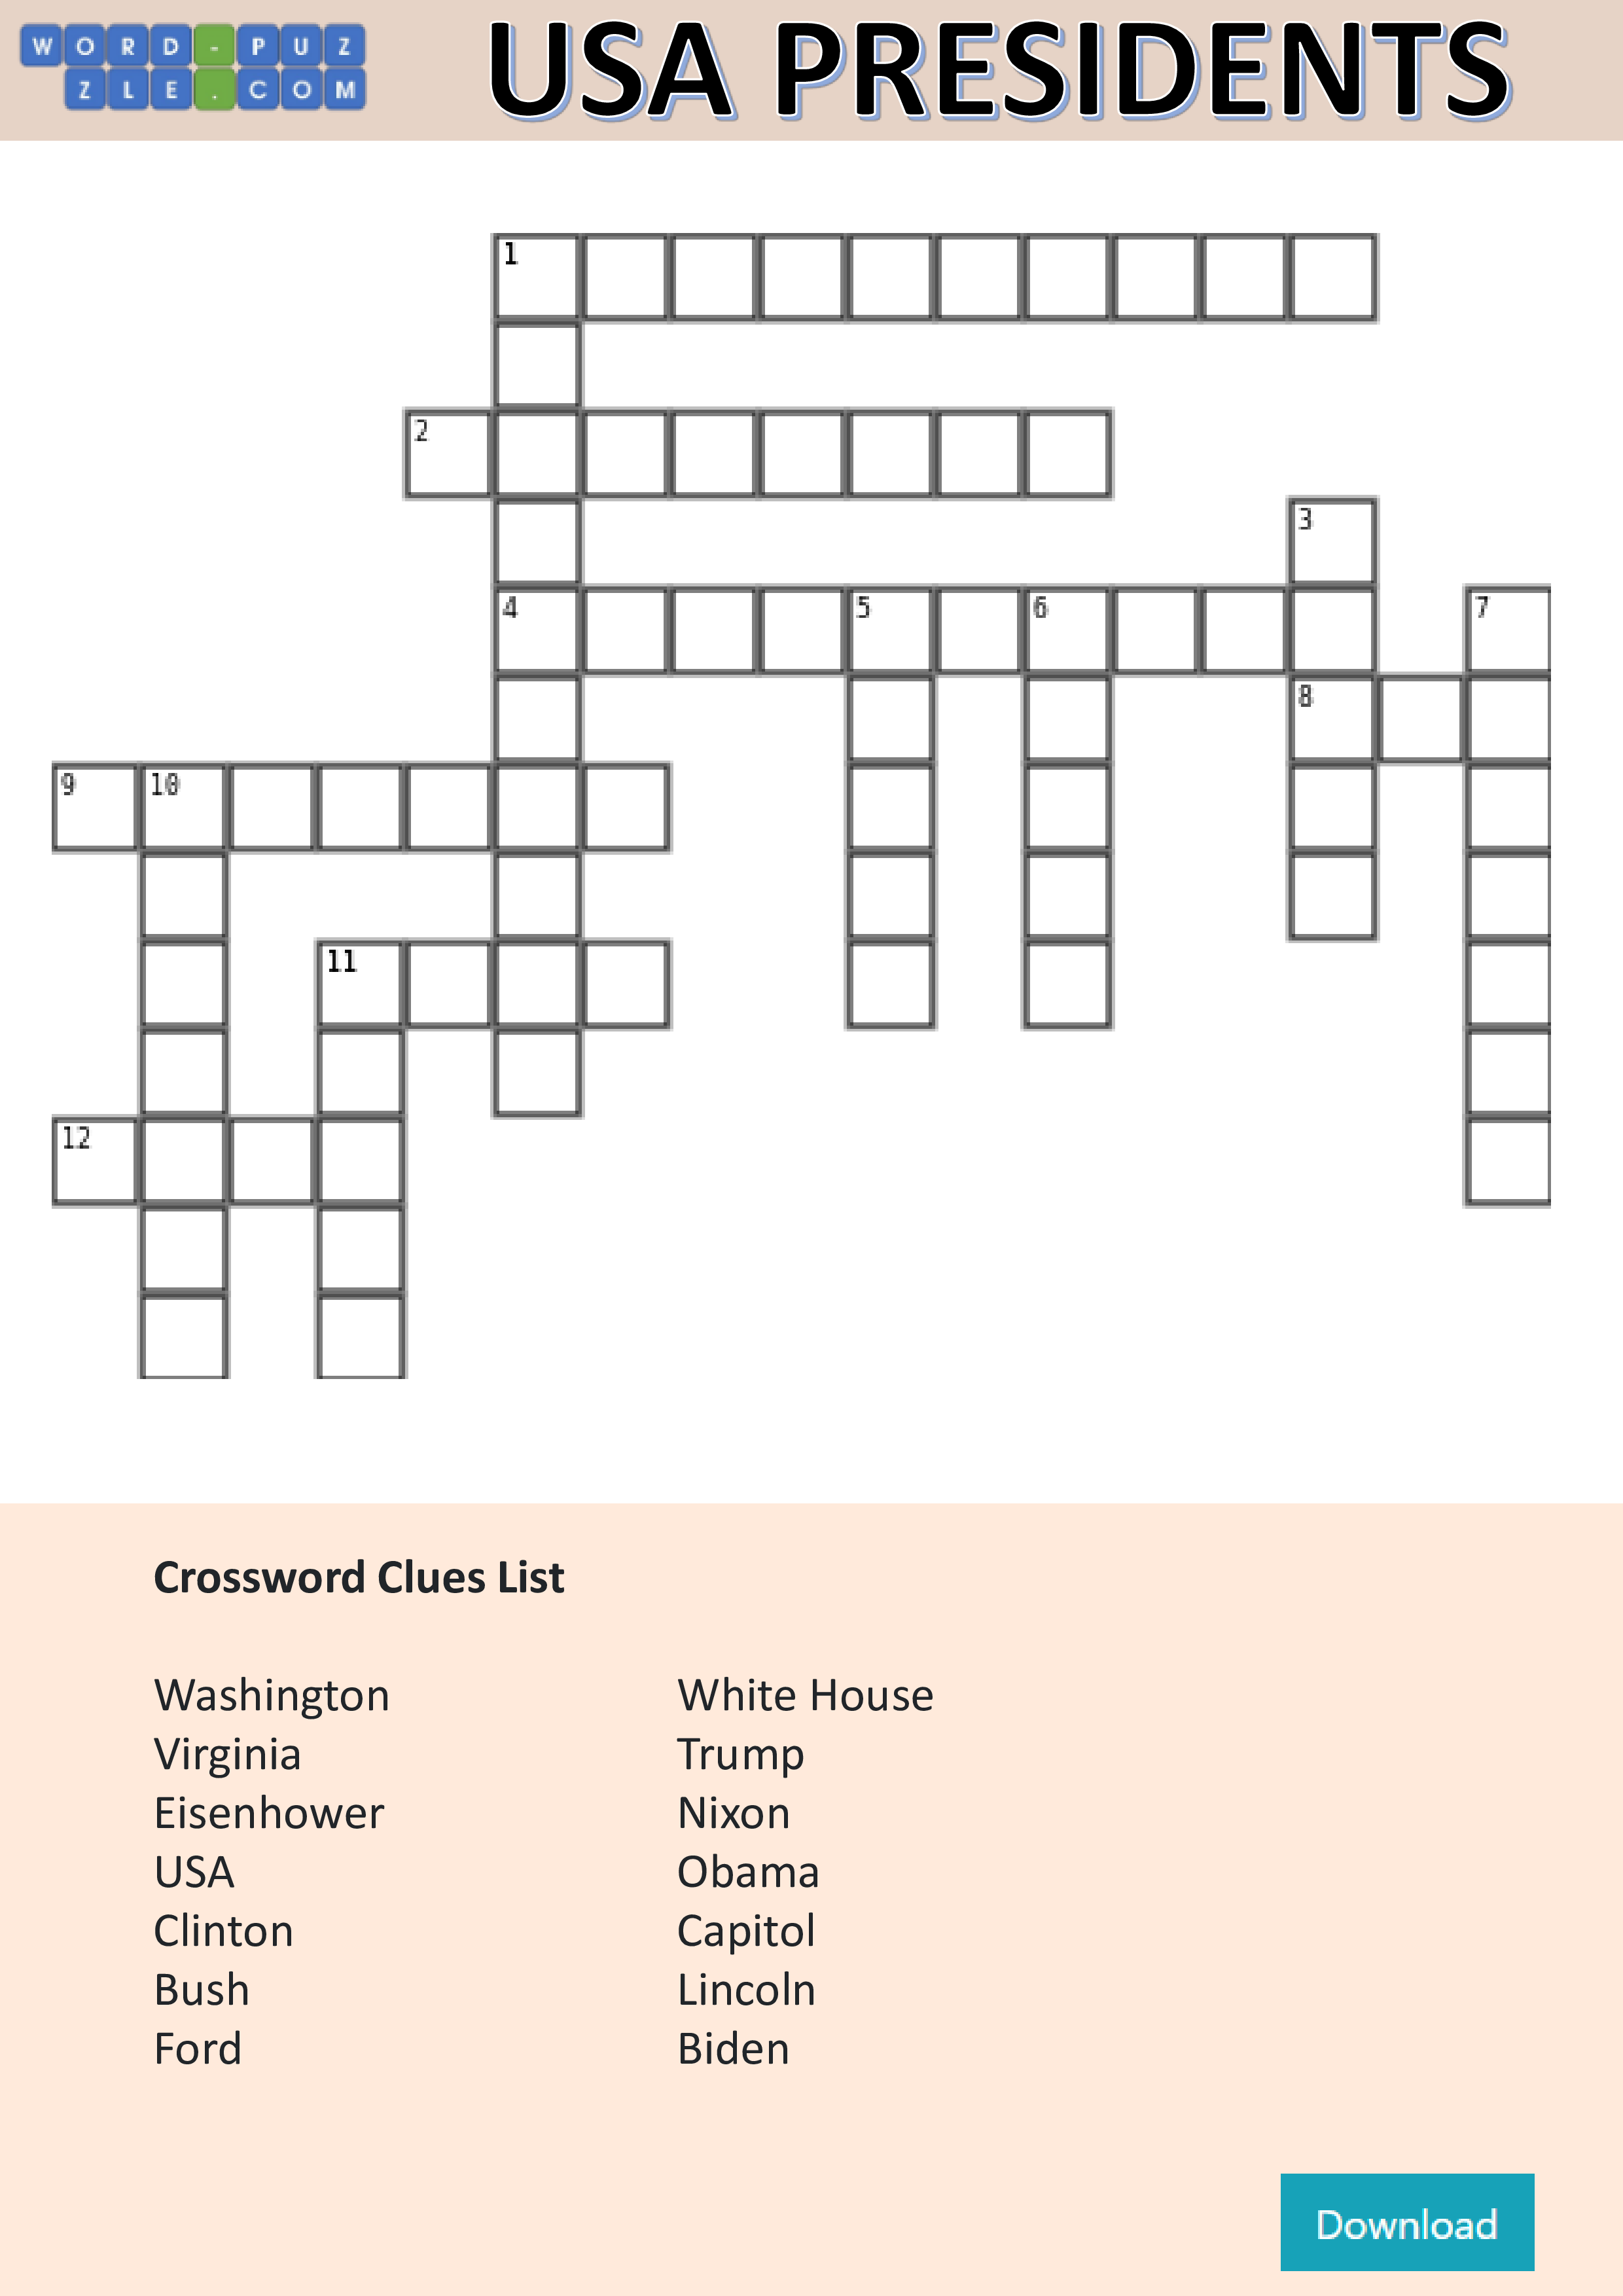 US Presidents Day Crossword Puzzle main image